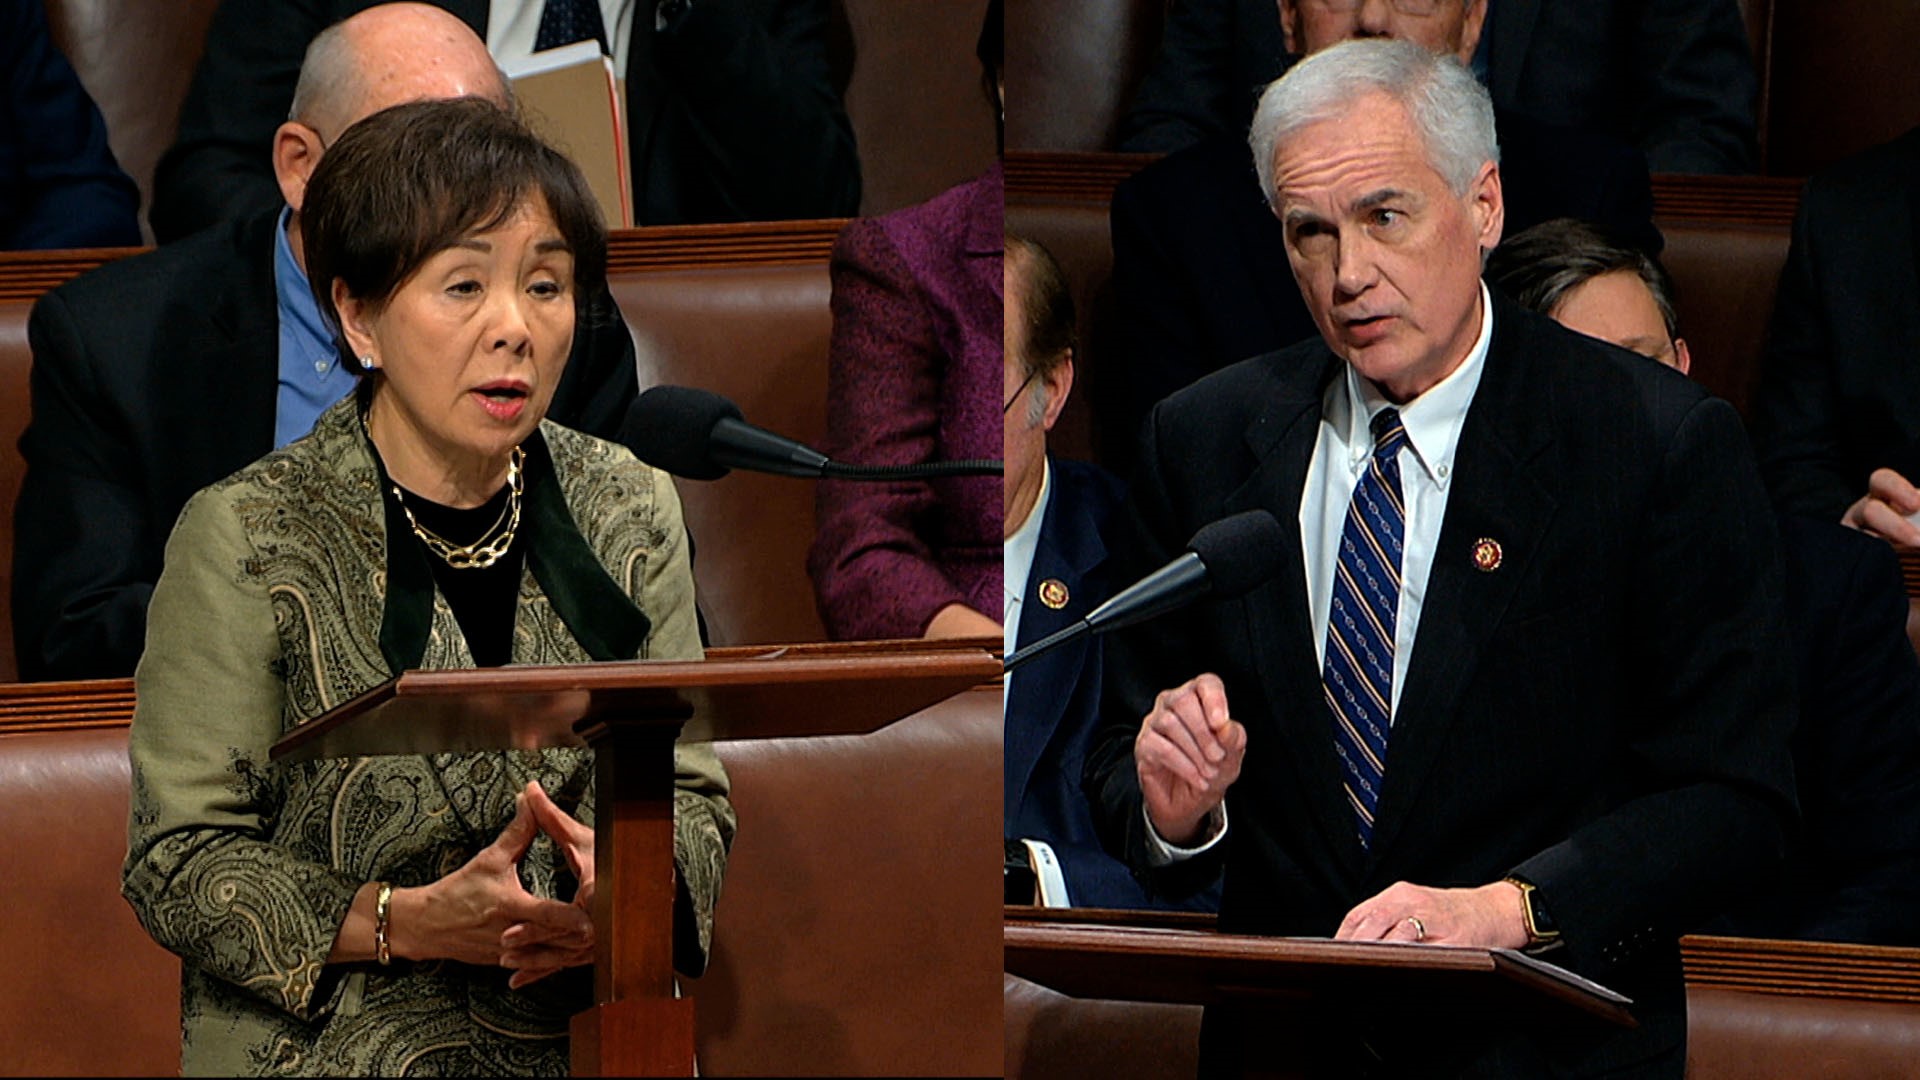 While Rep. Doris Matsui and Rep. Tom McClintock both condemned racism, a contrast on their views on Asian American discrimination.